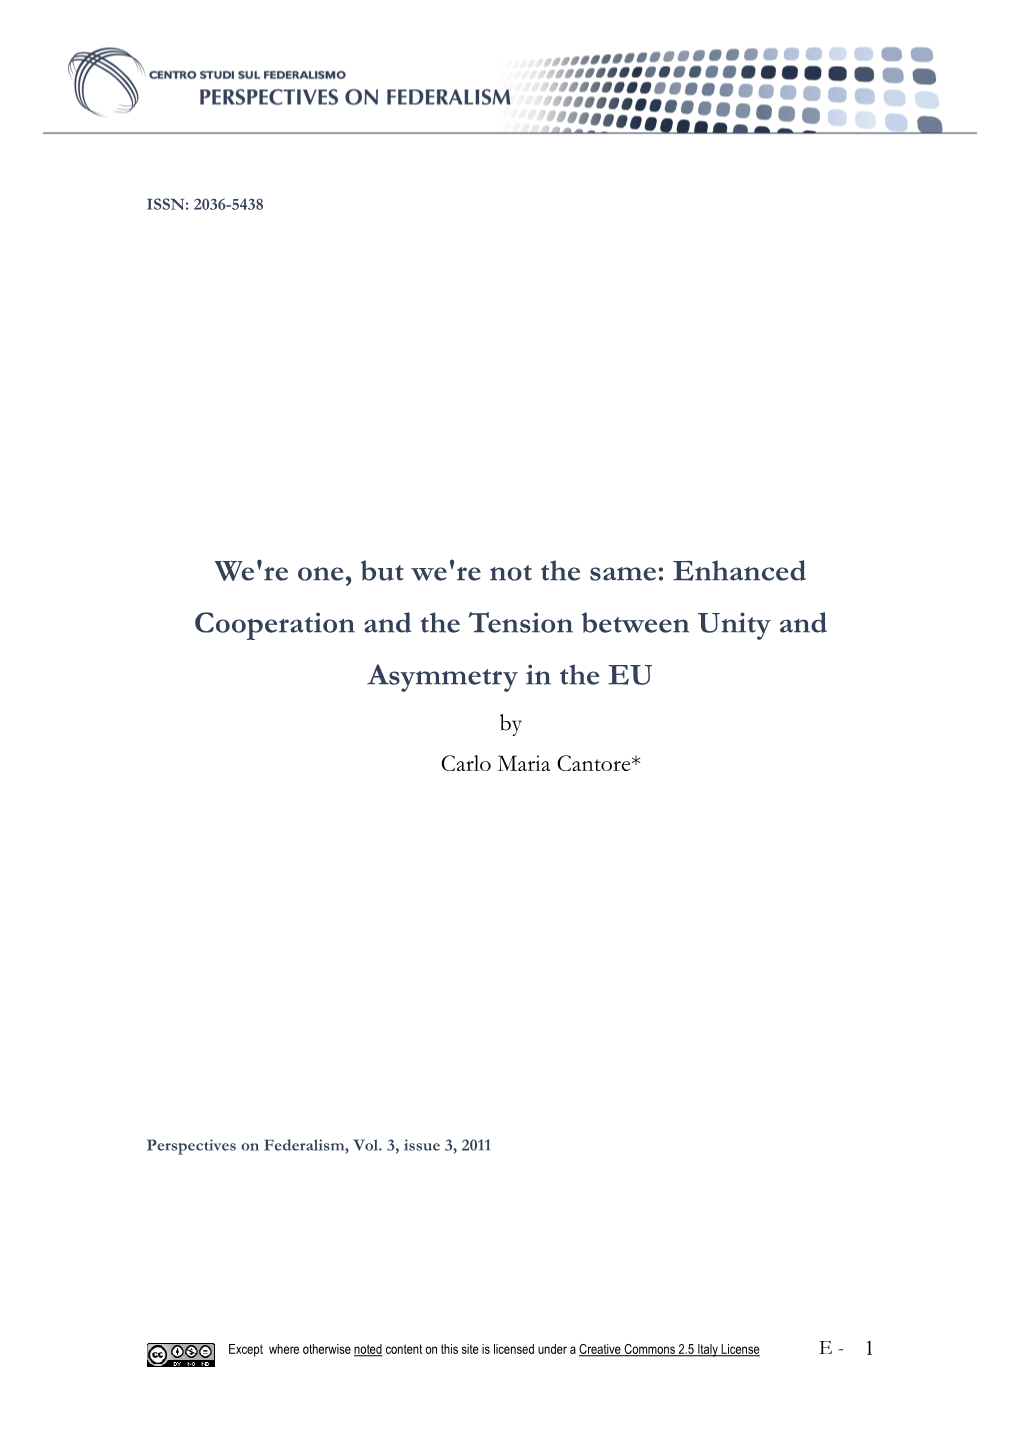 Enhanced Cooperation and the Tension Between Unity and Asymmetry in the EU by Carlo Maria Cantore*